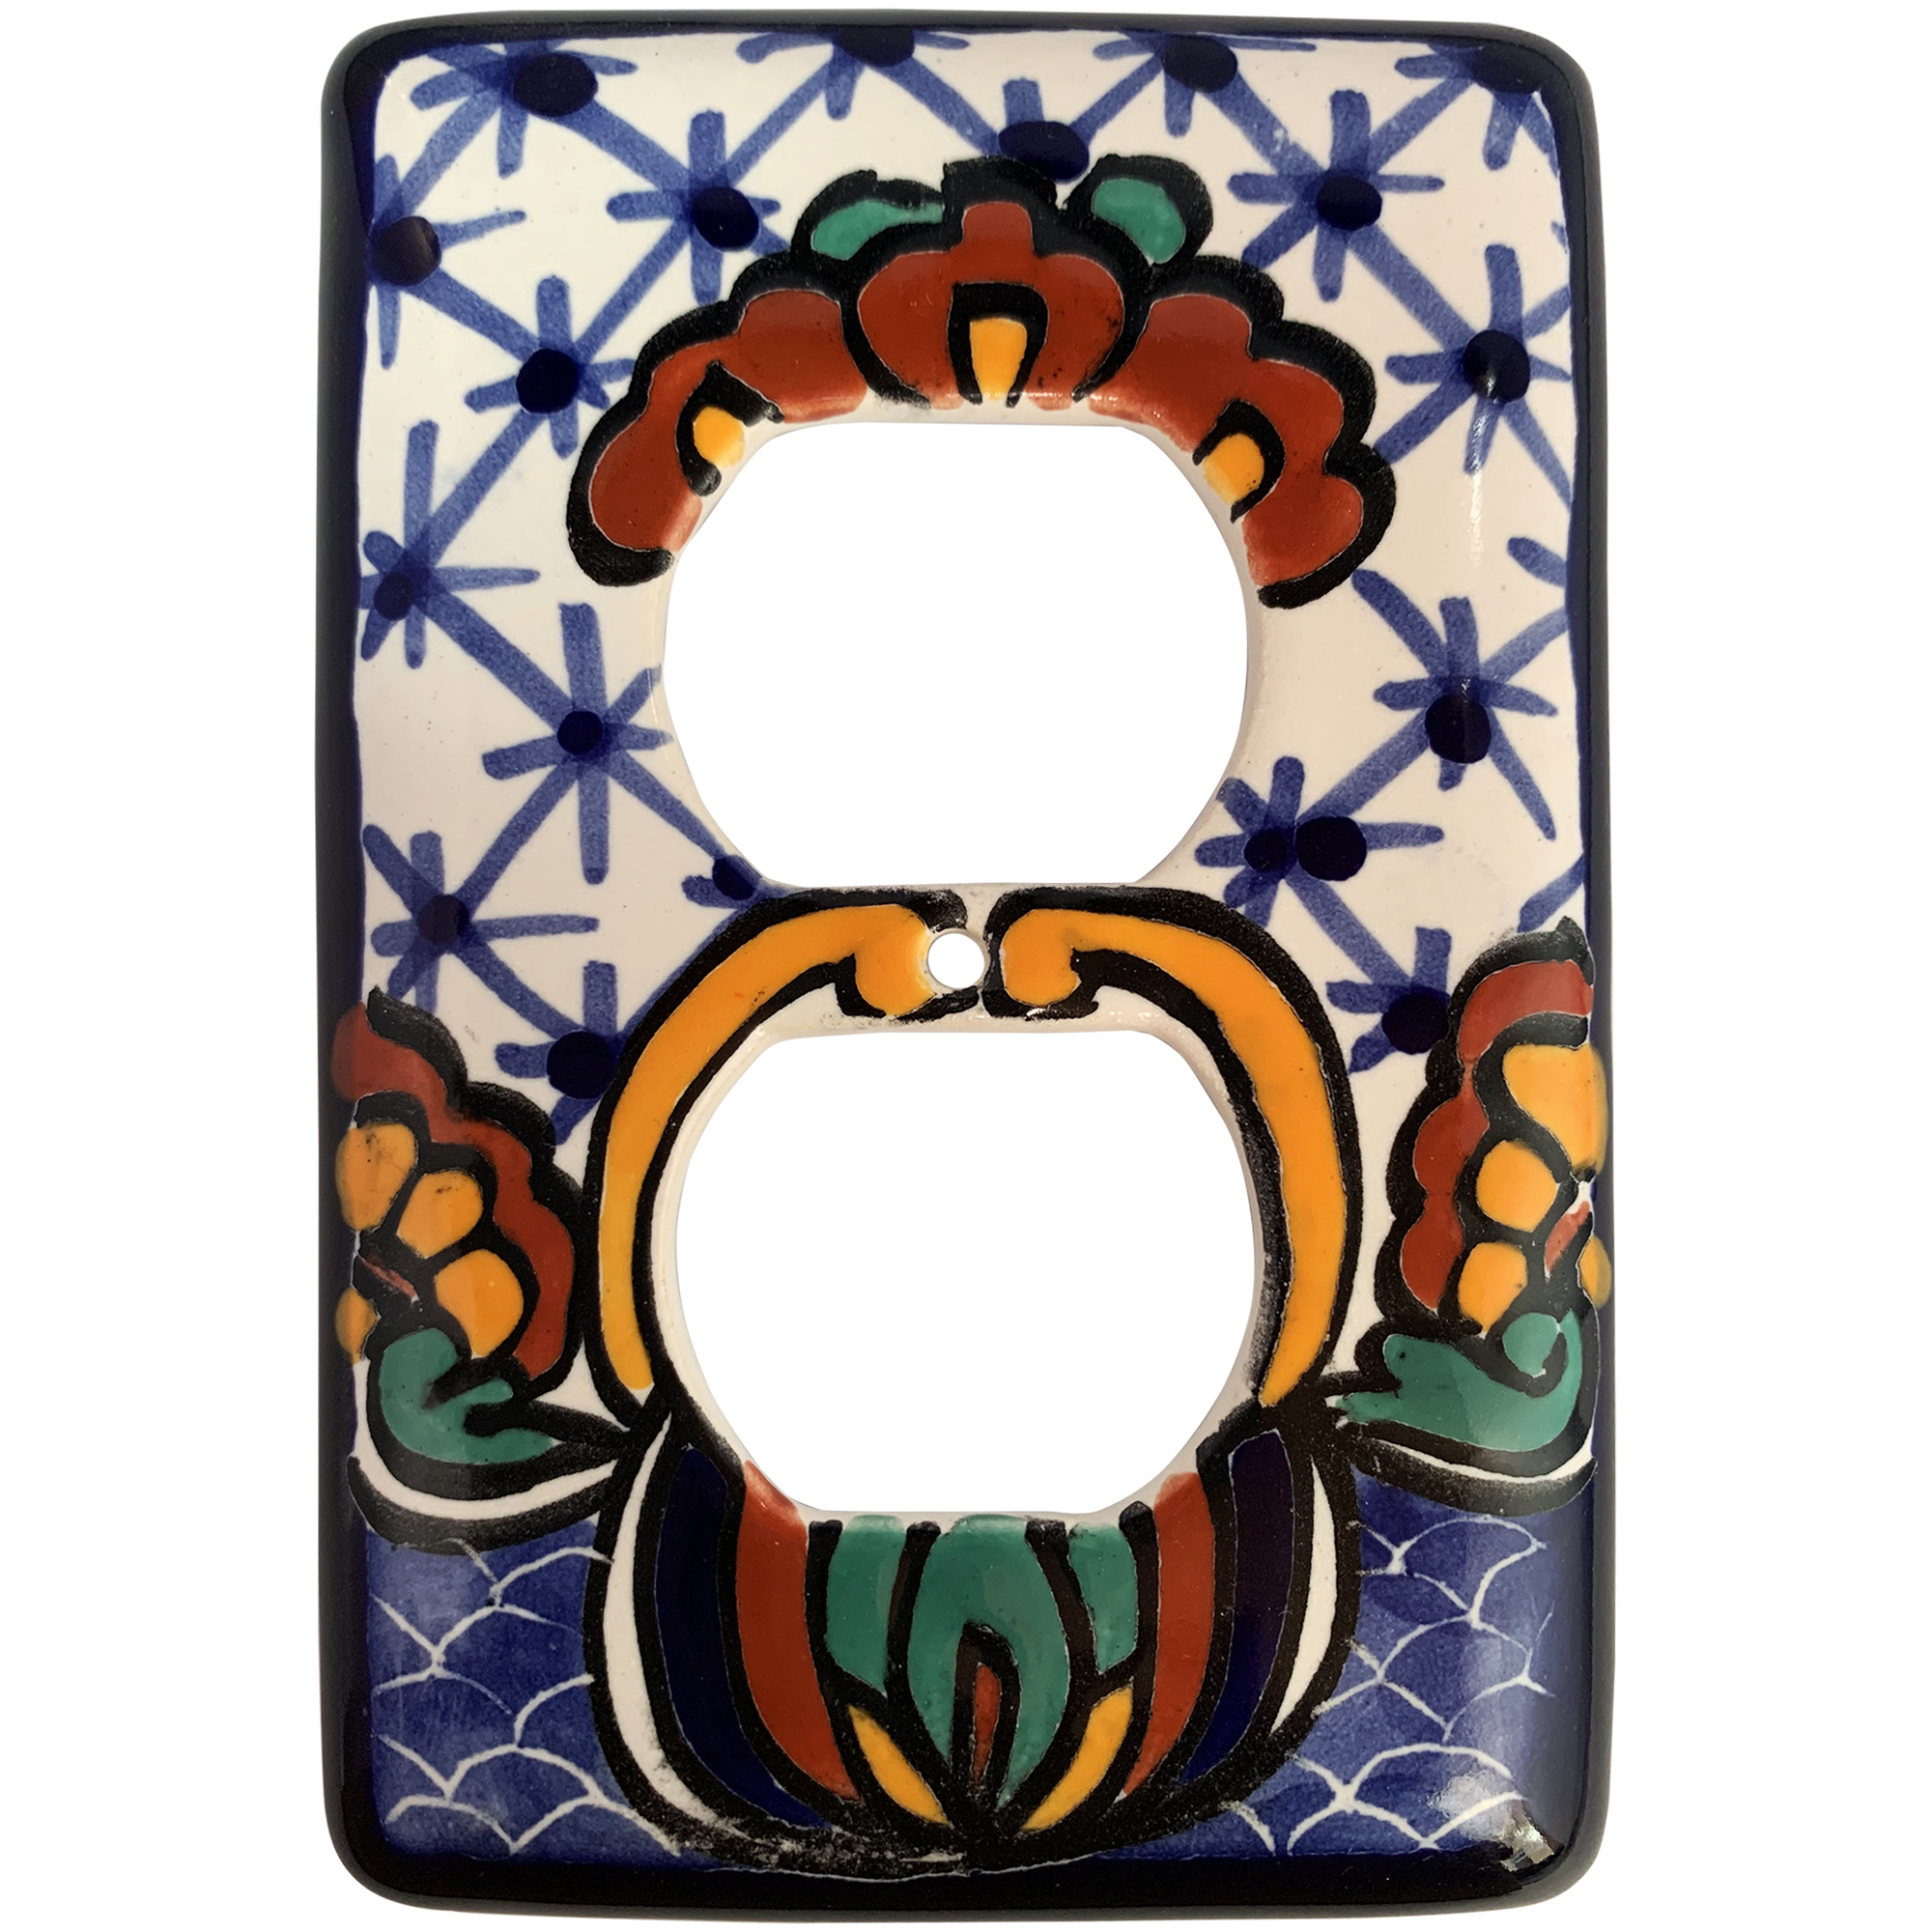 TalaMex Turtle Outlet Mexican Talavera Ceramic Switch Plate